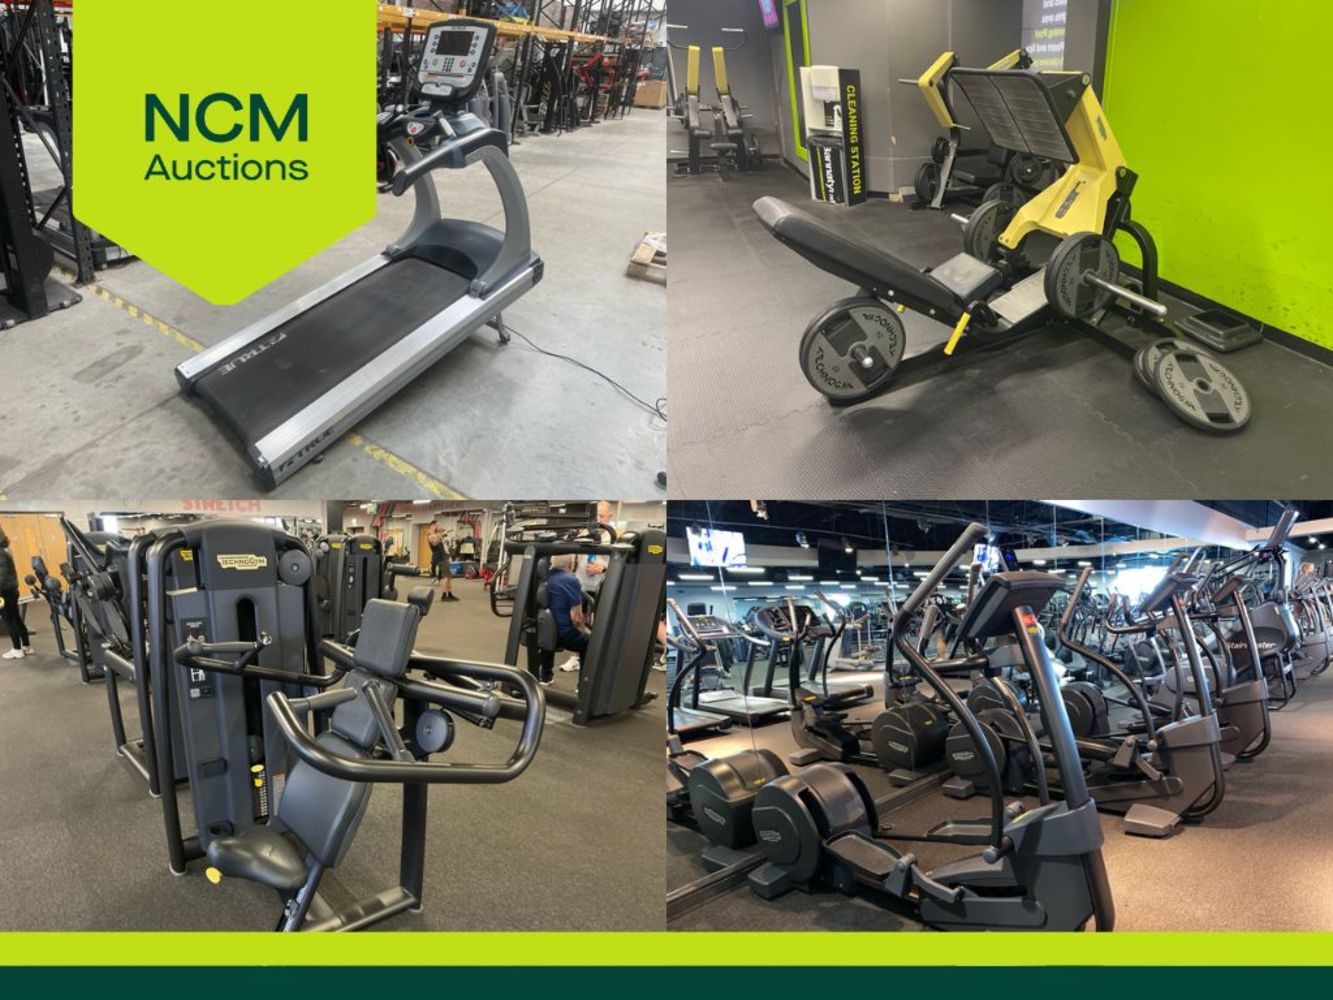 NO RESERVE - Commercial Gym Equipment - To Include Shoulder Press, Treadmills, Chest Press, Spin Bikes, Cross Trainers, Steppers & More